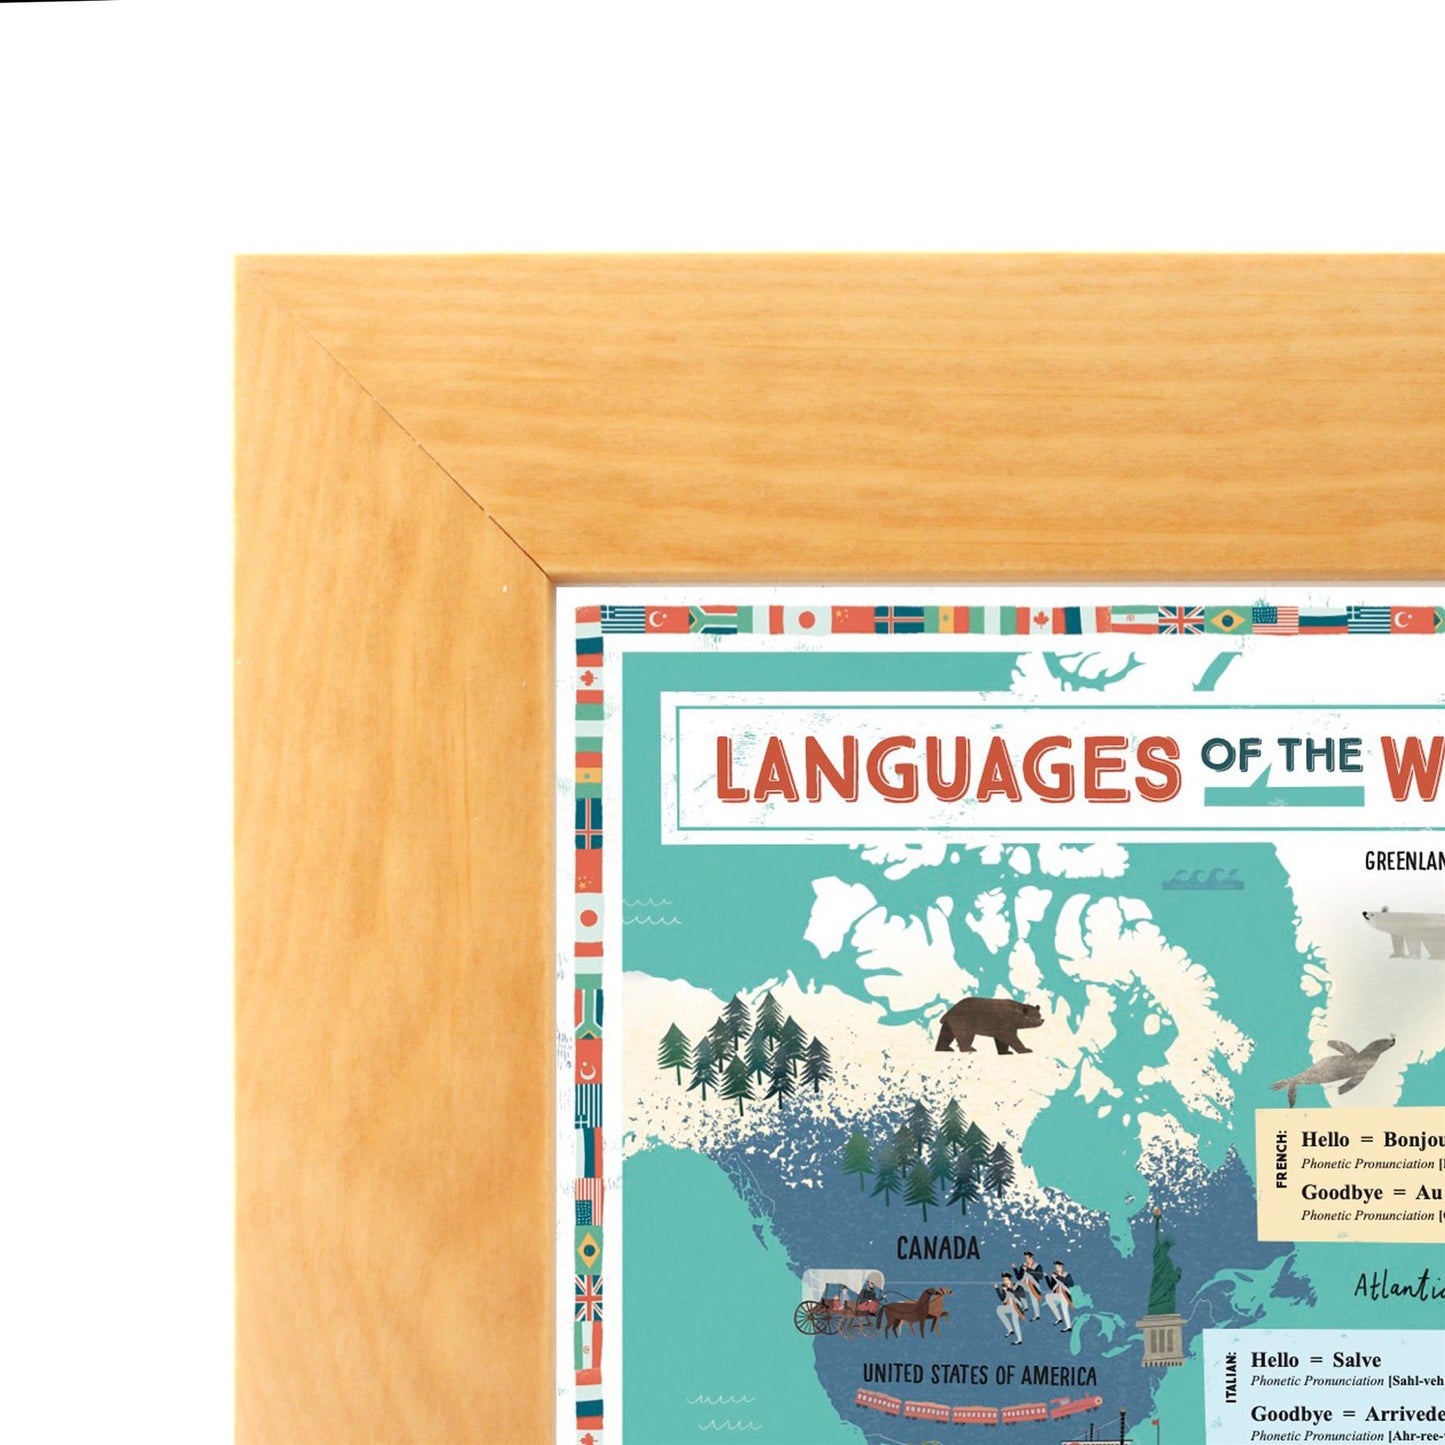 Prisoners of Geography Languages Of The World Educational Wall Map